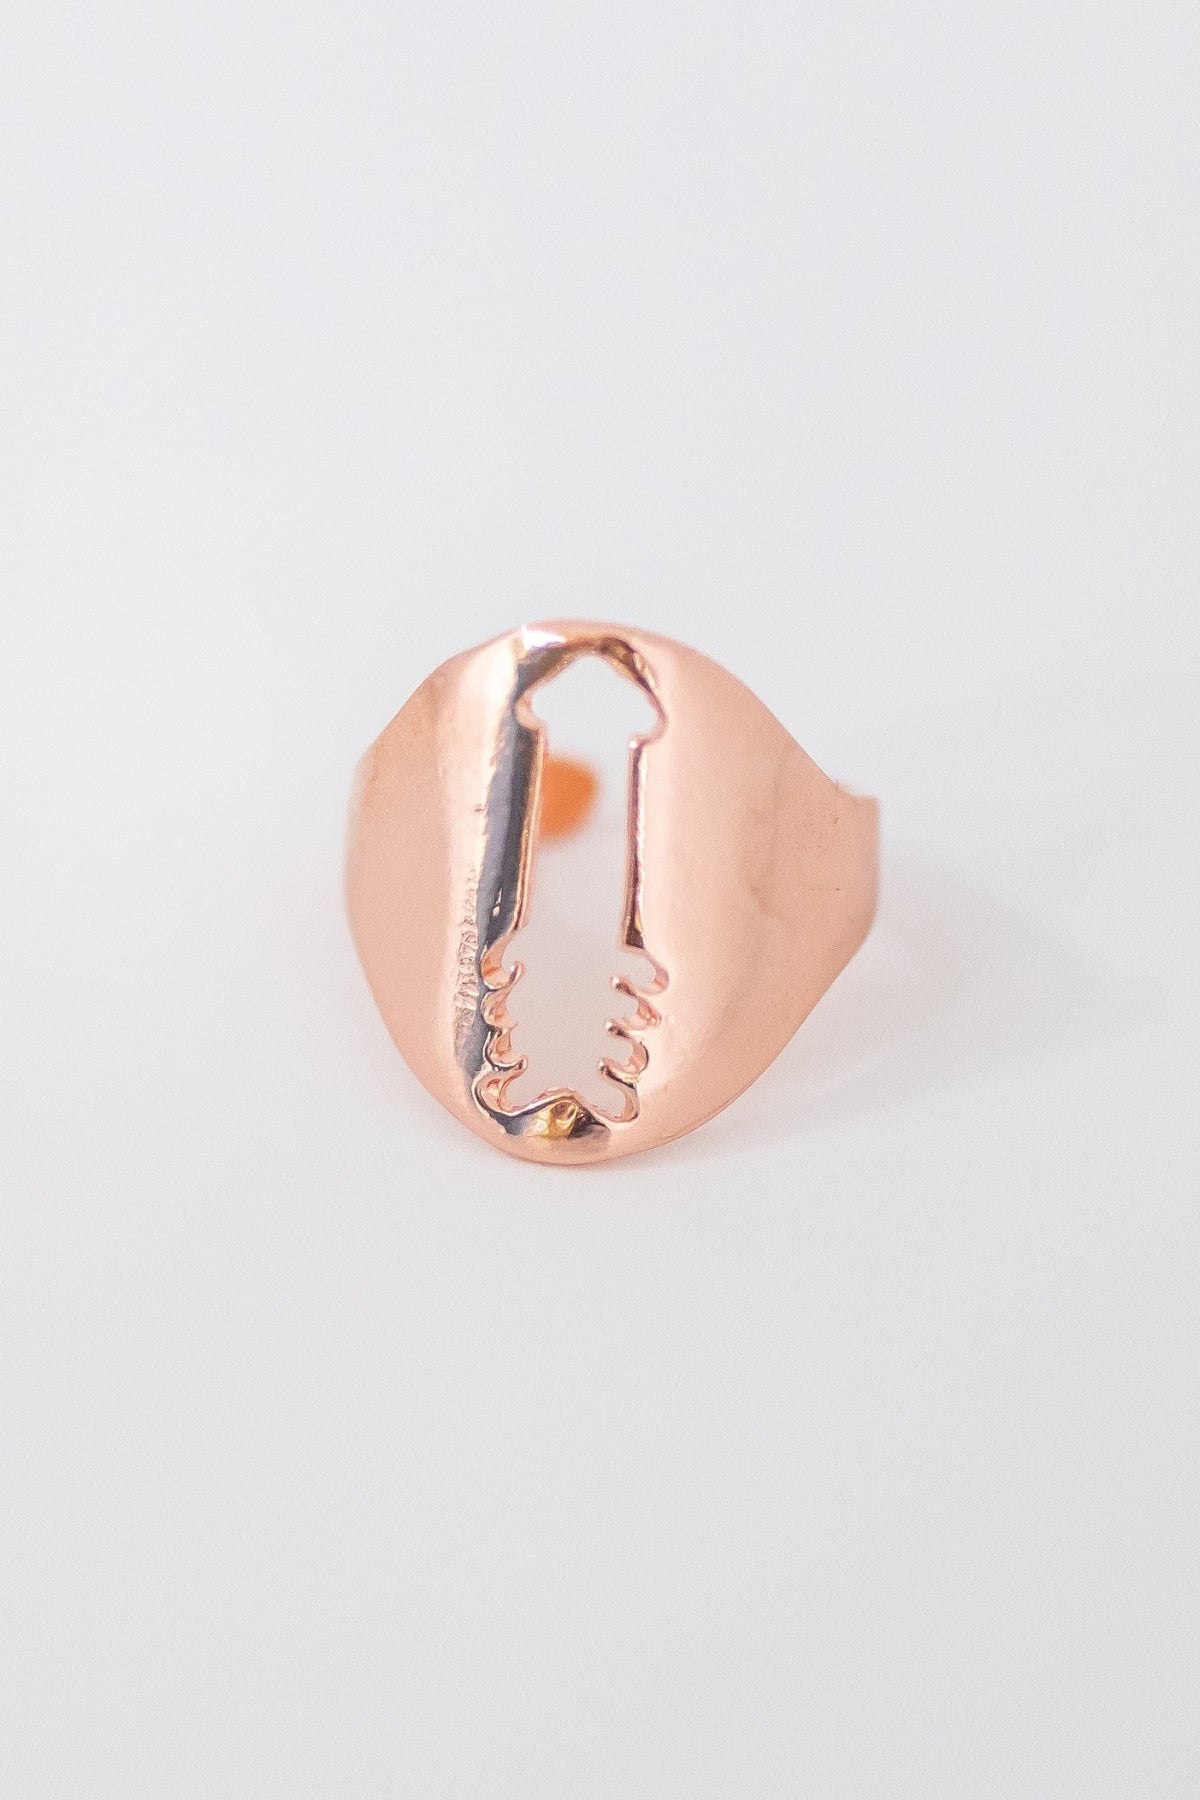 Women's Rose Gold Ring with Arrow Cut-Out